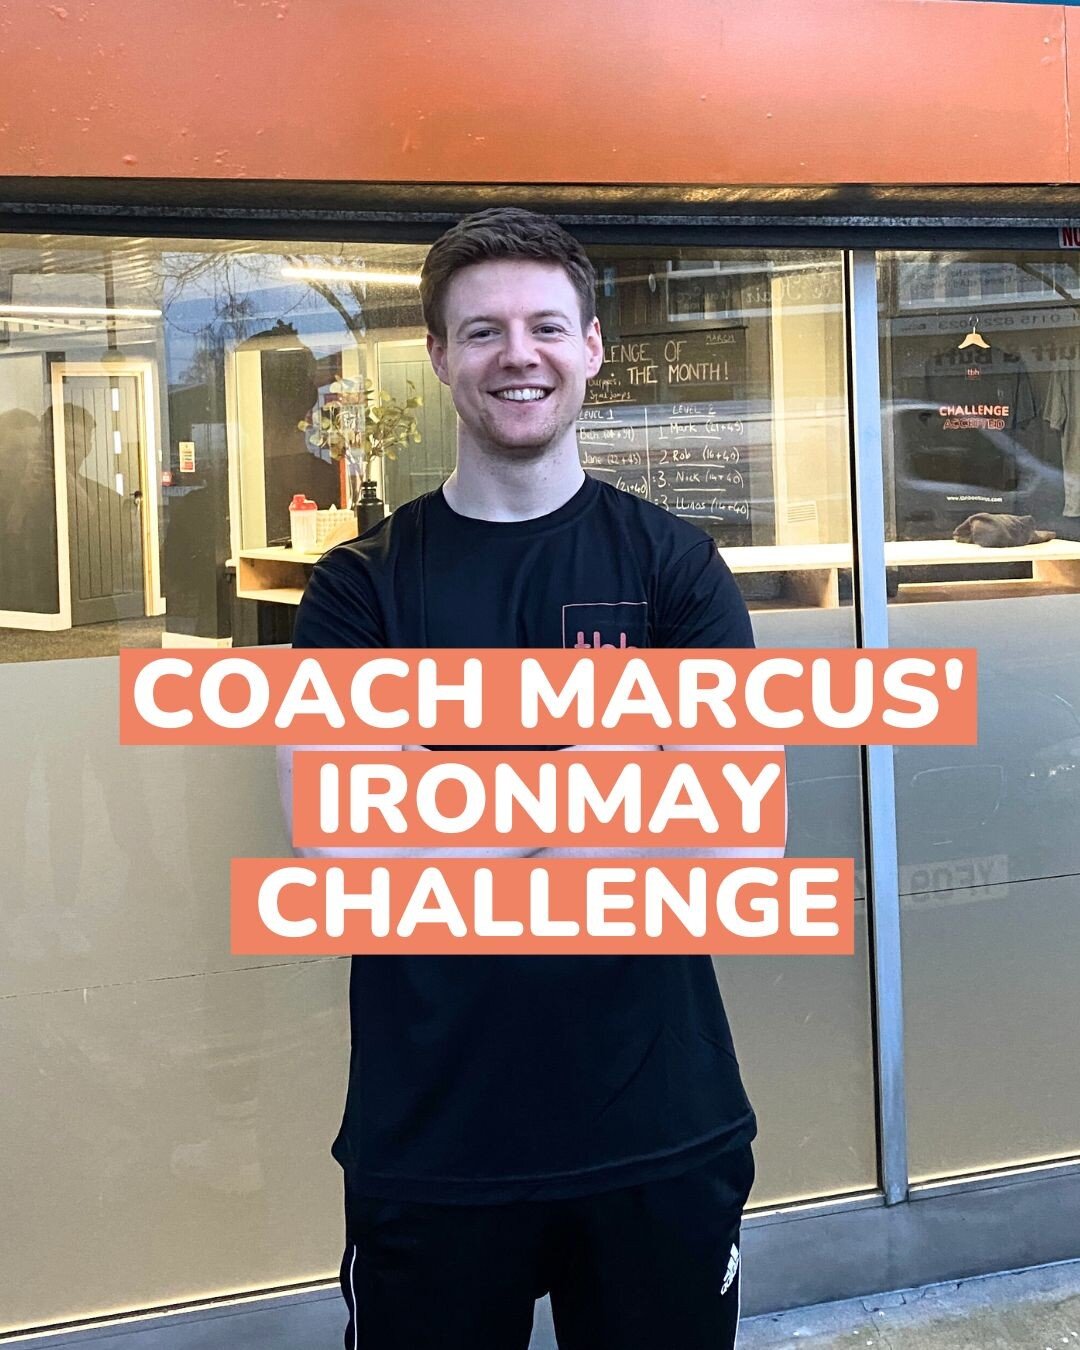 Coach Marcus is taking on his very own May challenge 💪🏼

Marcus is completing a full Iron Man over 14 days

to raise money for Cancer Research.

🏊🏼&zwj;♂️ 2.4 miles swim
🚴🏼&zwj;♂️ 112 miles cycle
🏃🏼&zwj;♂️ 26.2 miles run

Any donations in sup